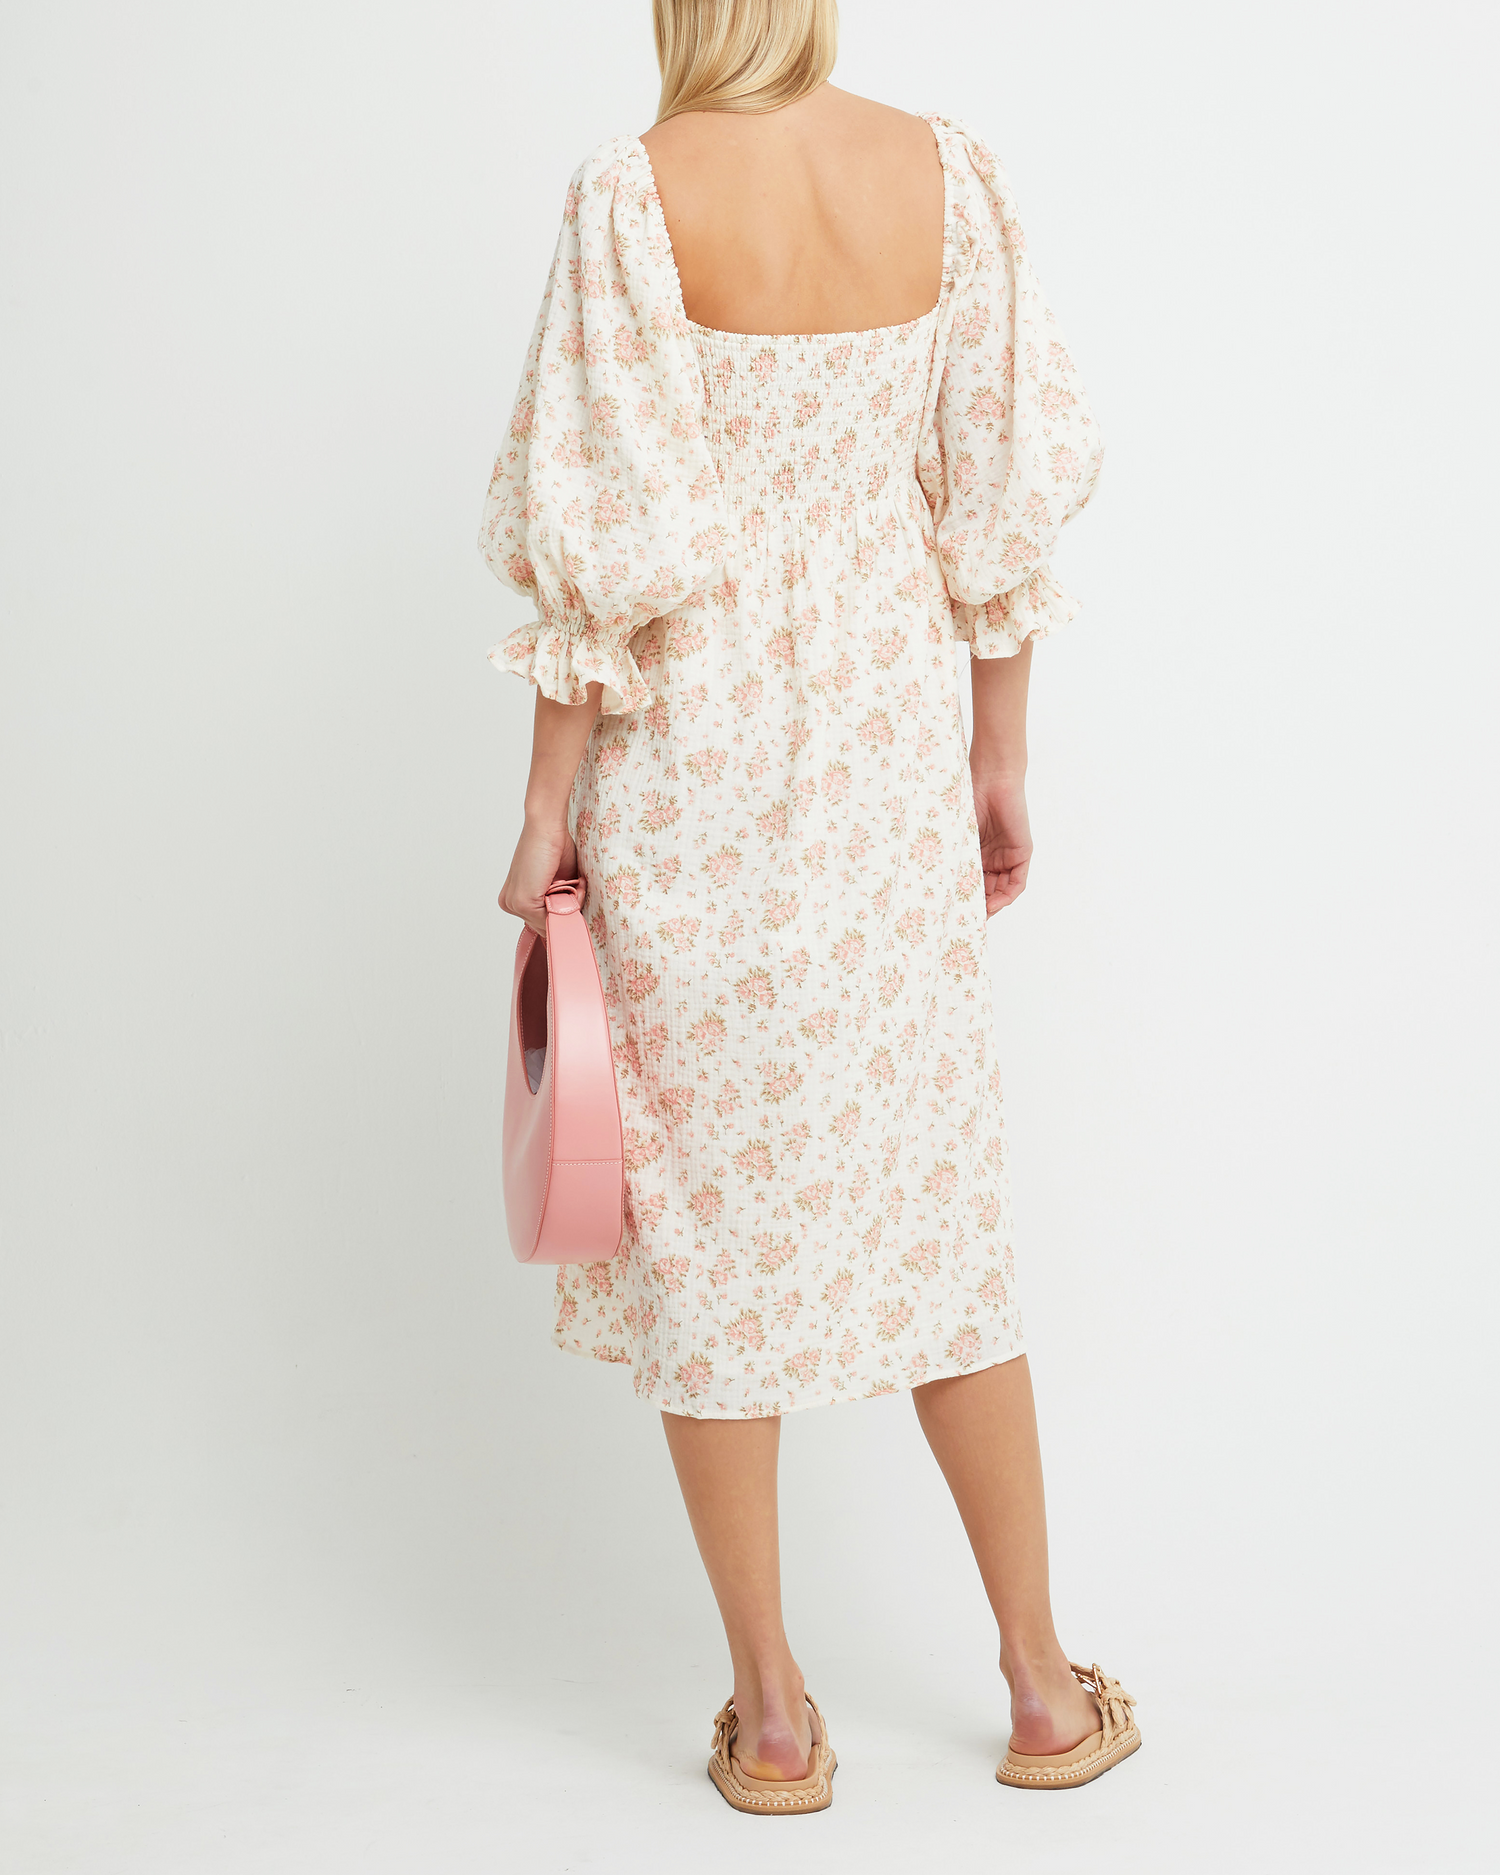 Second image of Athena Dress, a pink midi dress, off shoulder, long sleeve, puff sleeves, smocked